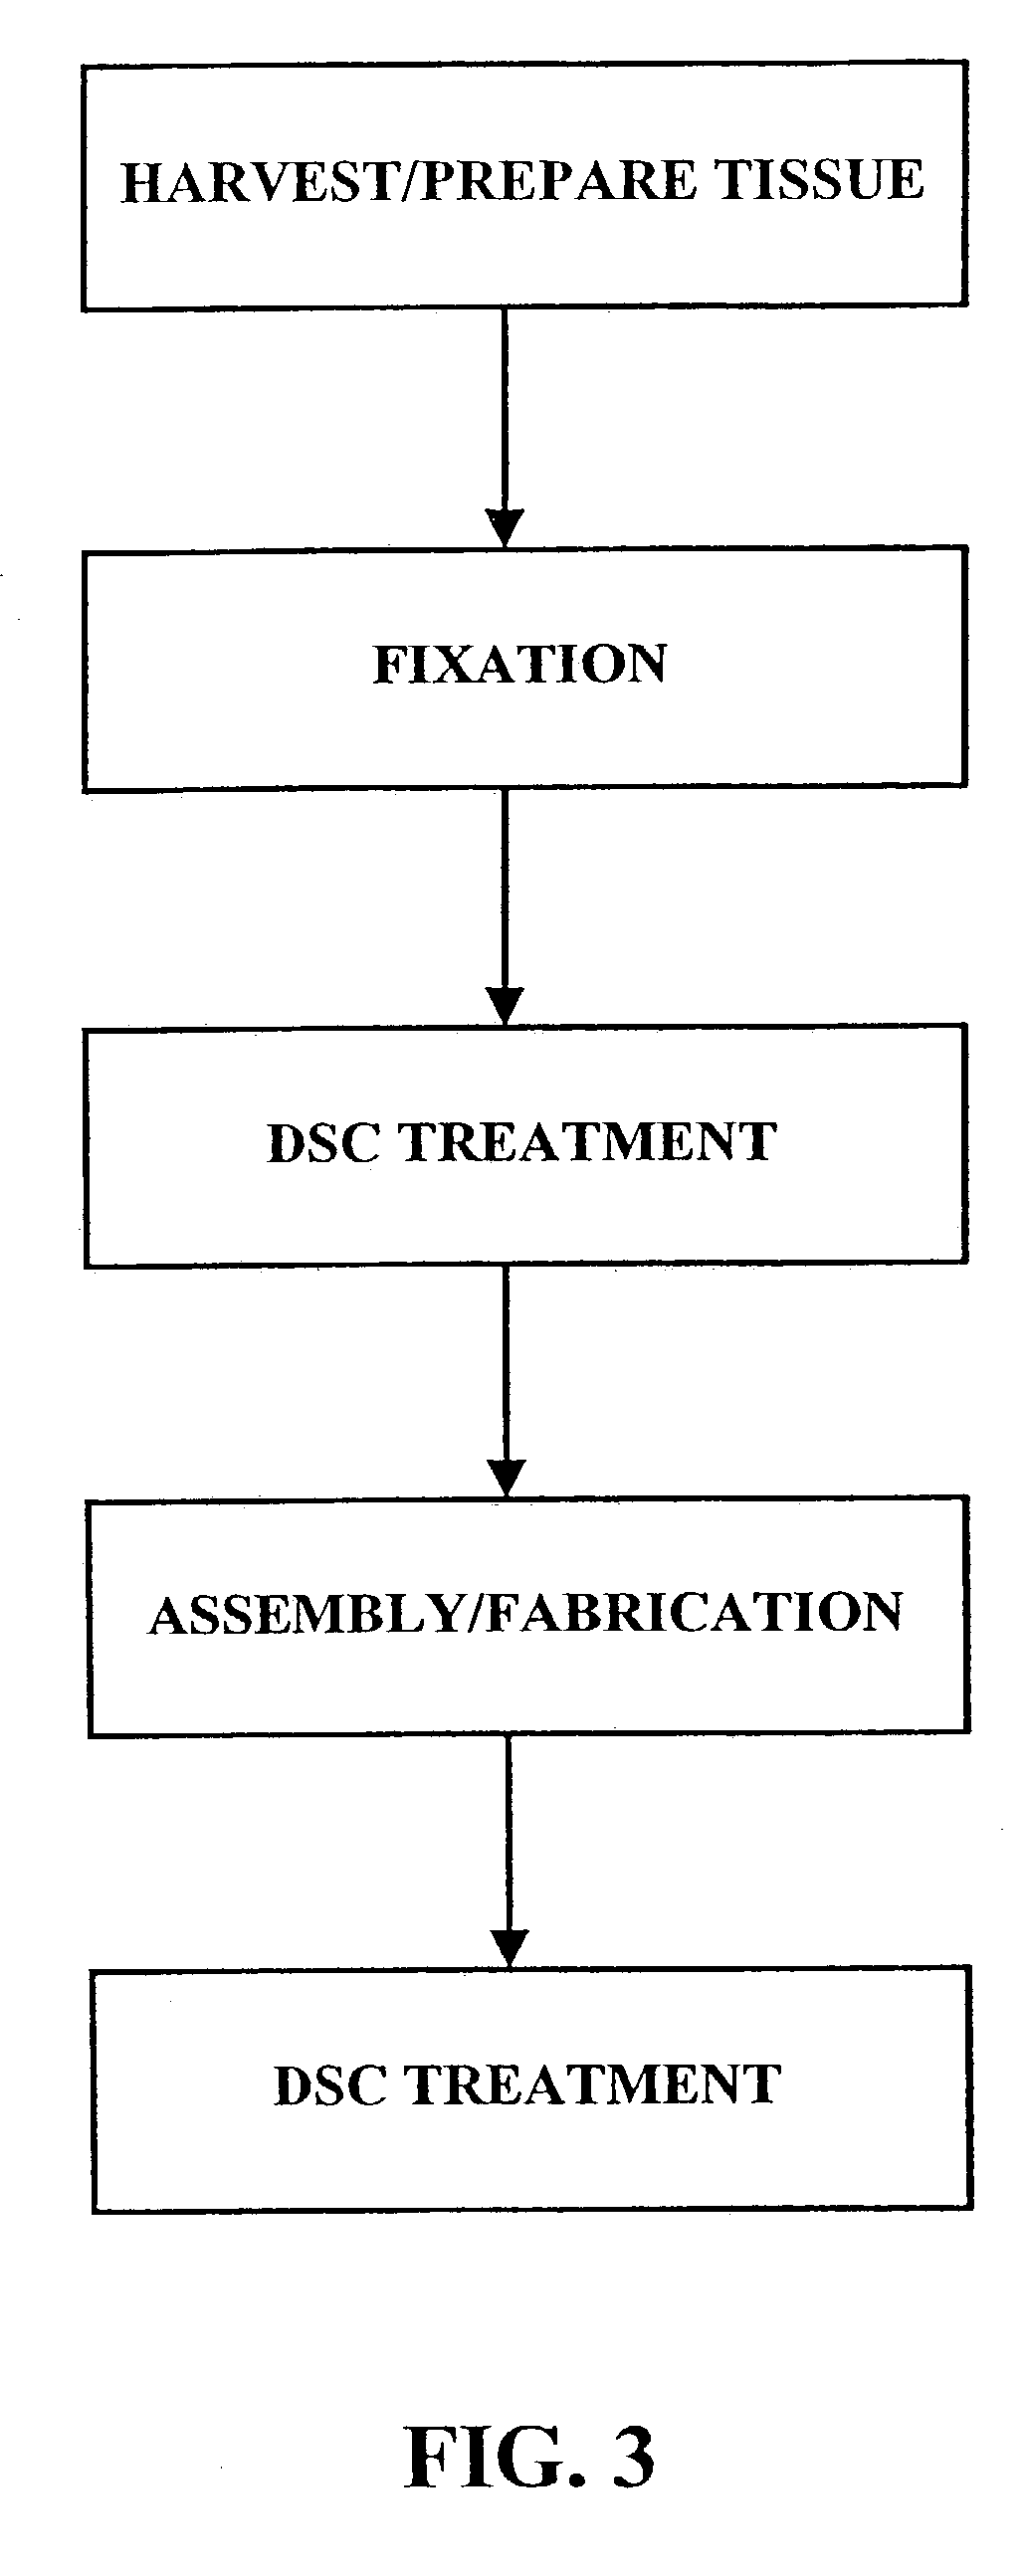 Method for treatment of biological tissues to mitigate post-implantation calcification and thrombosis